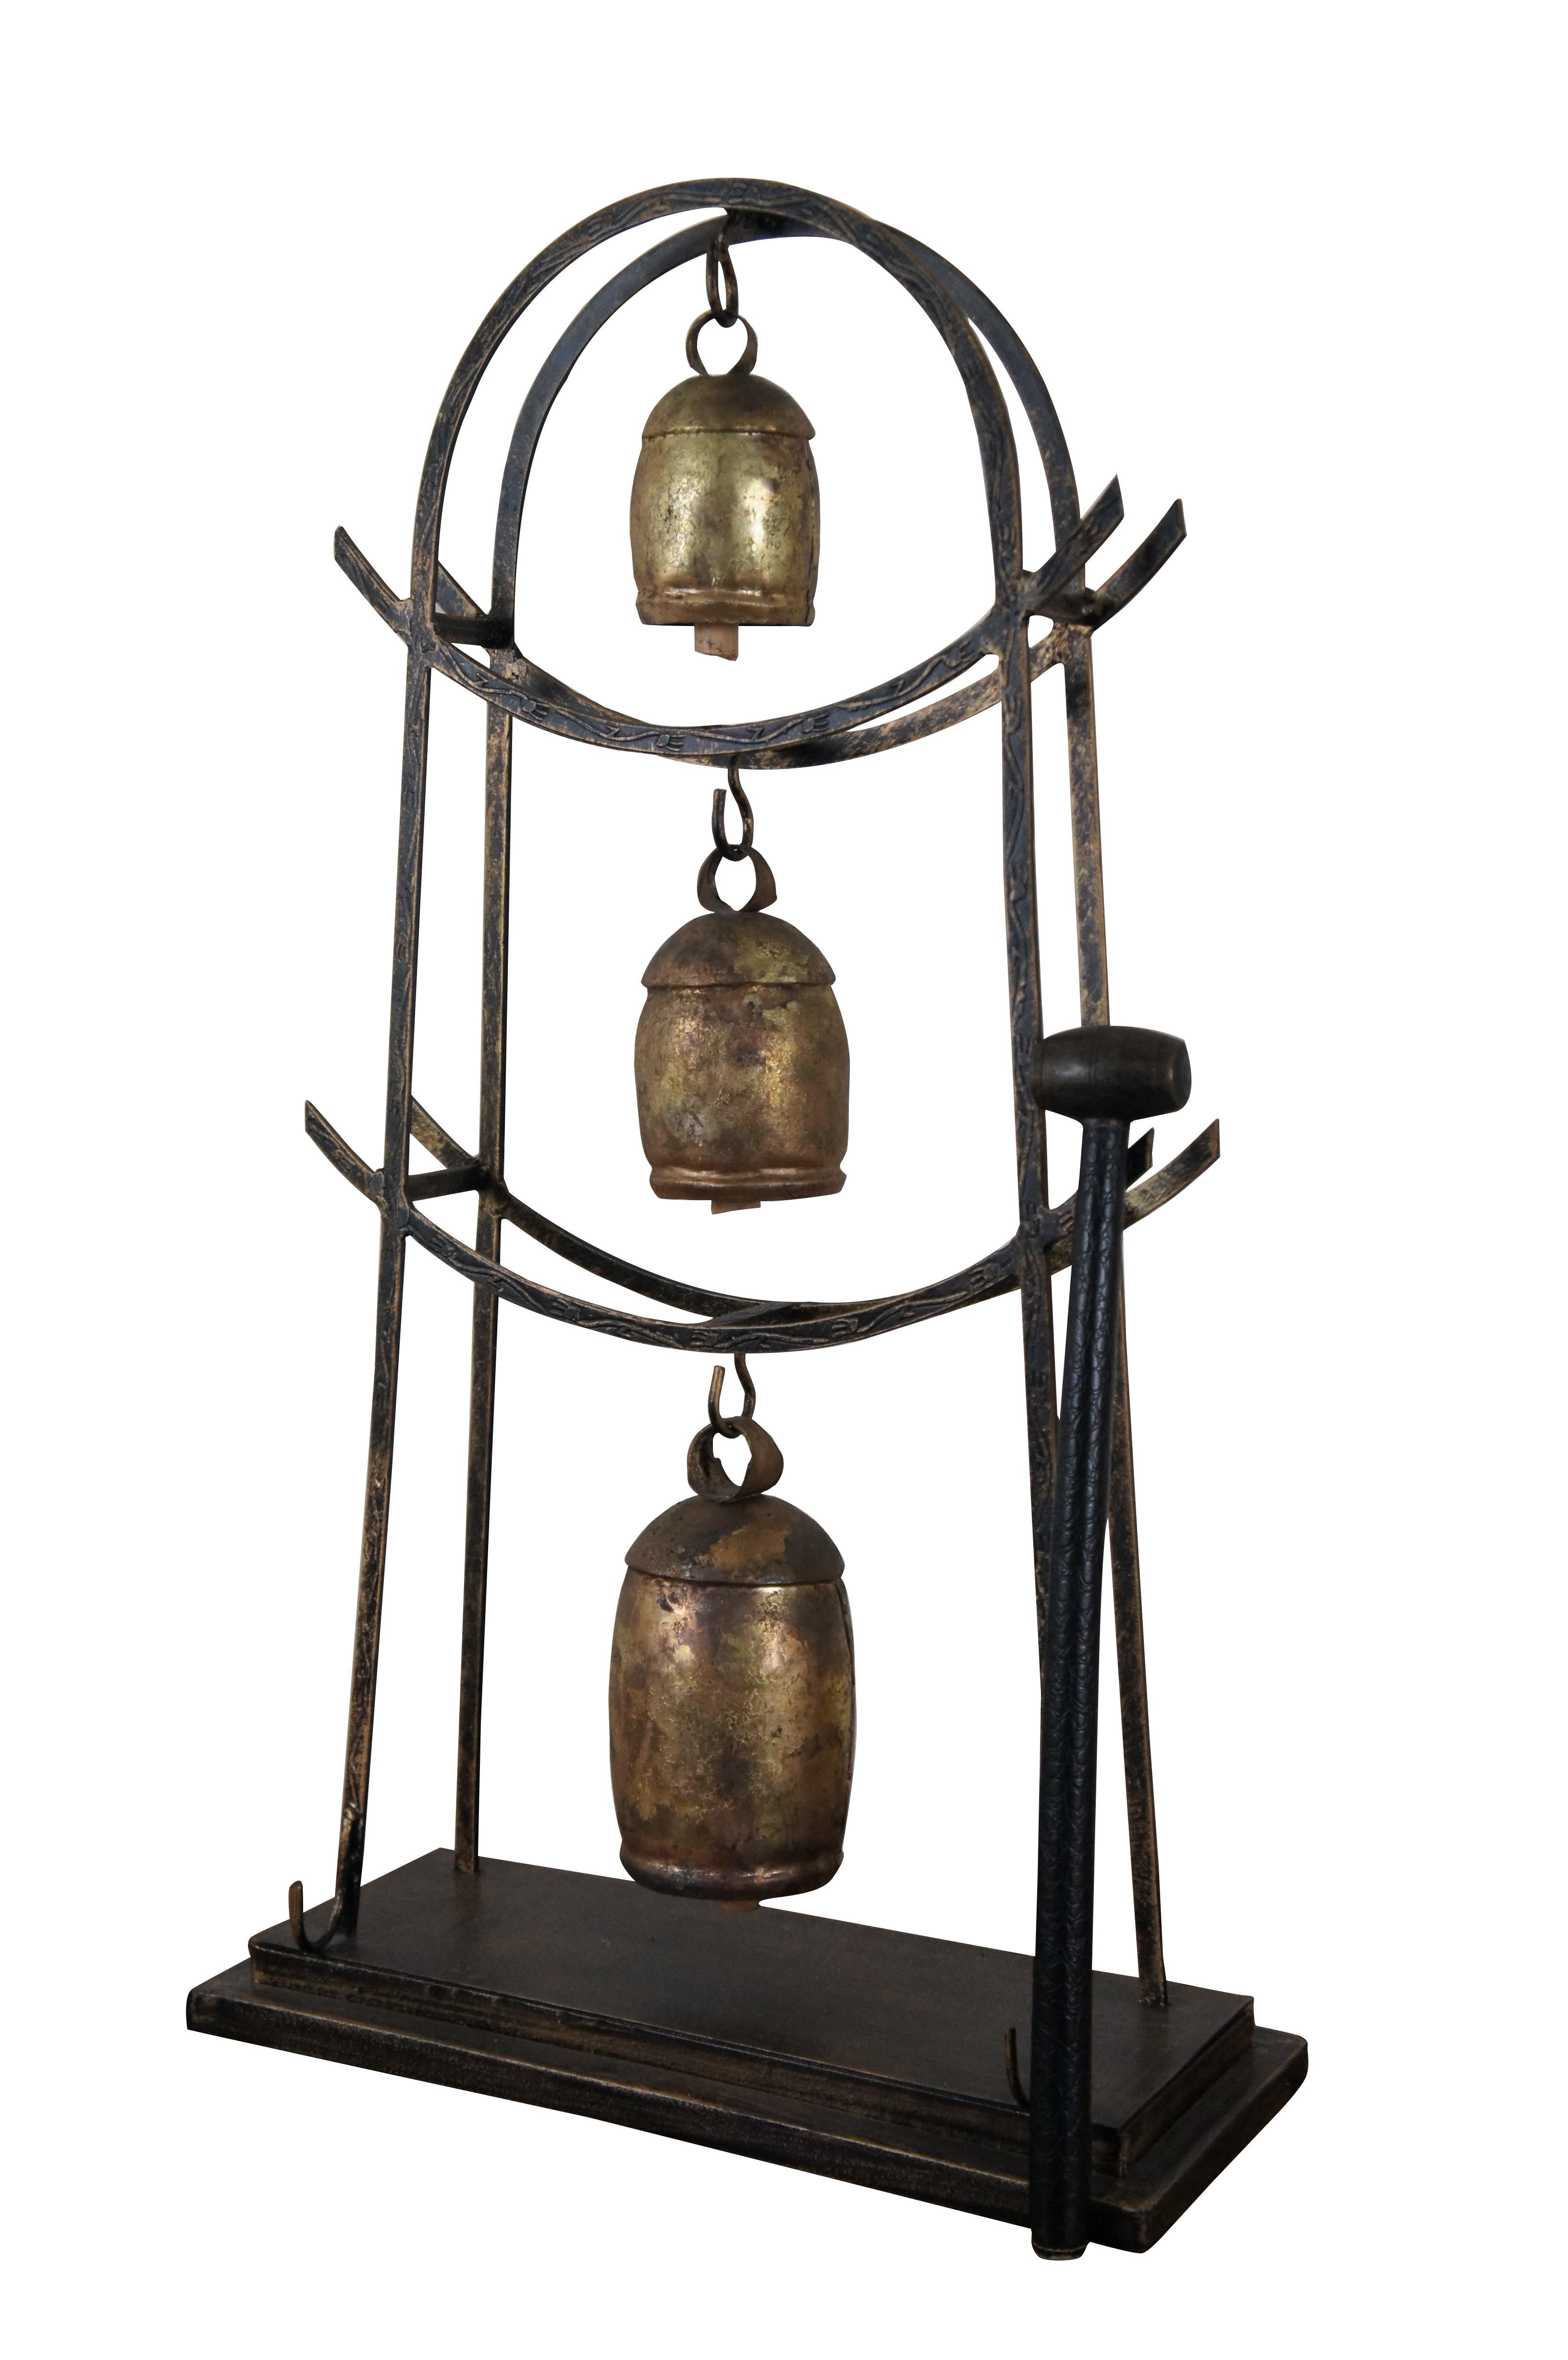 Vintage set of three Indian “Noah” or temple bells, handmade in iron and brass with wooden clappers, suspended from tiers of an arched metal frame. Base includes hooks for holding the long wooden mallet with leather wrapped handle.

Noah Bell